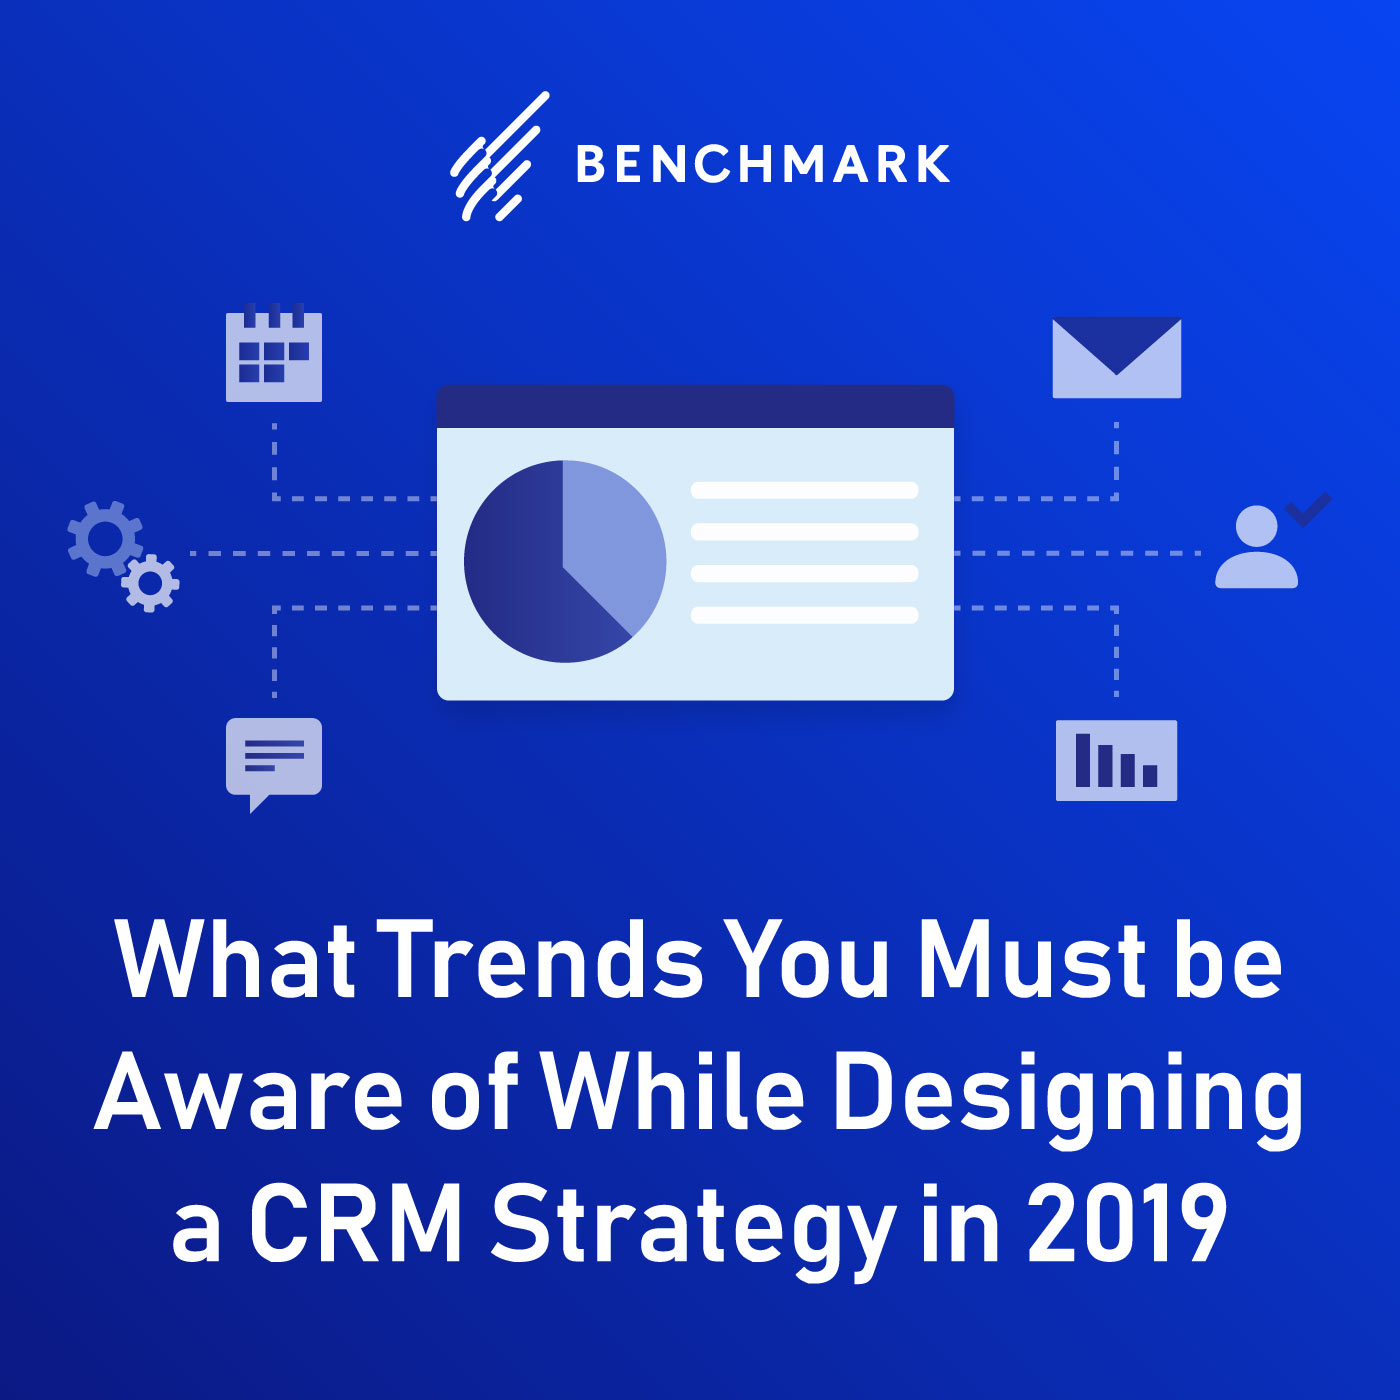 What Trends You Must be Aware of While Designing a CRM Strategy in 2019